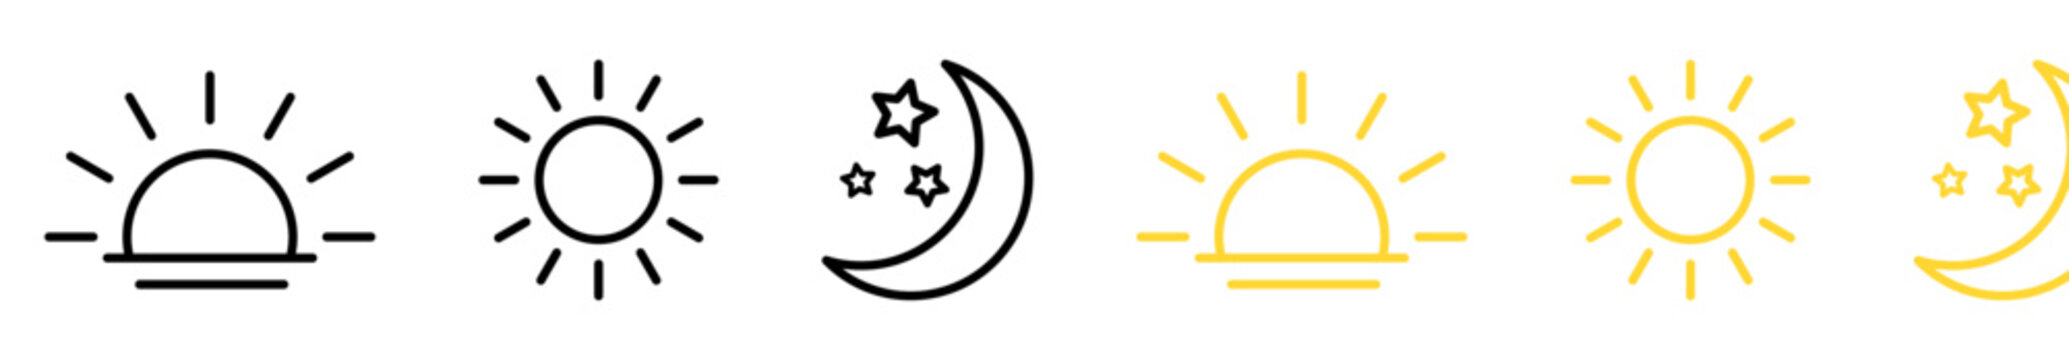 time of the day signs. rising and setting sun, crescent moon and stars, day and night time symbols. 